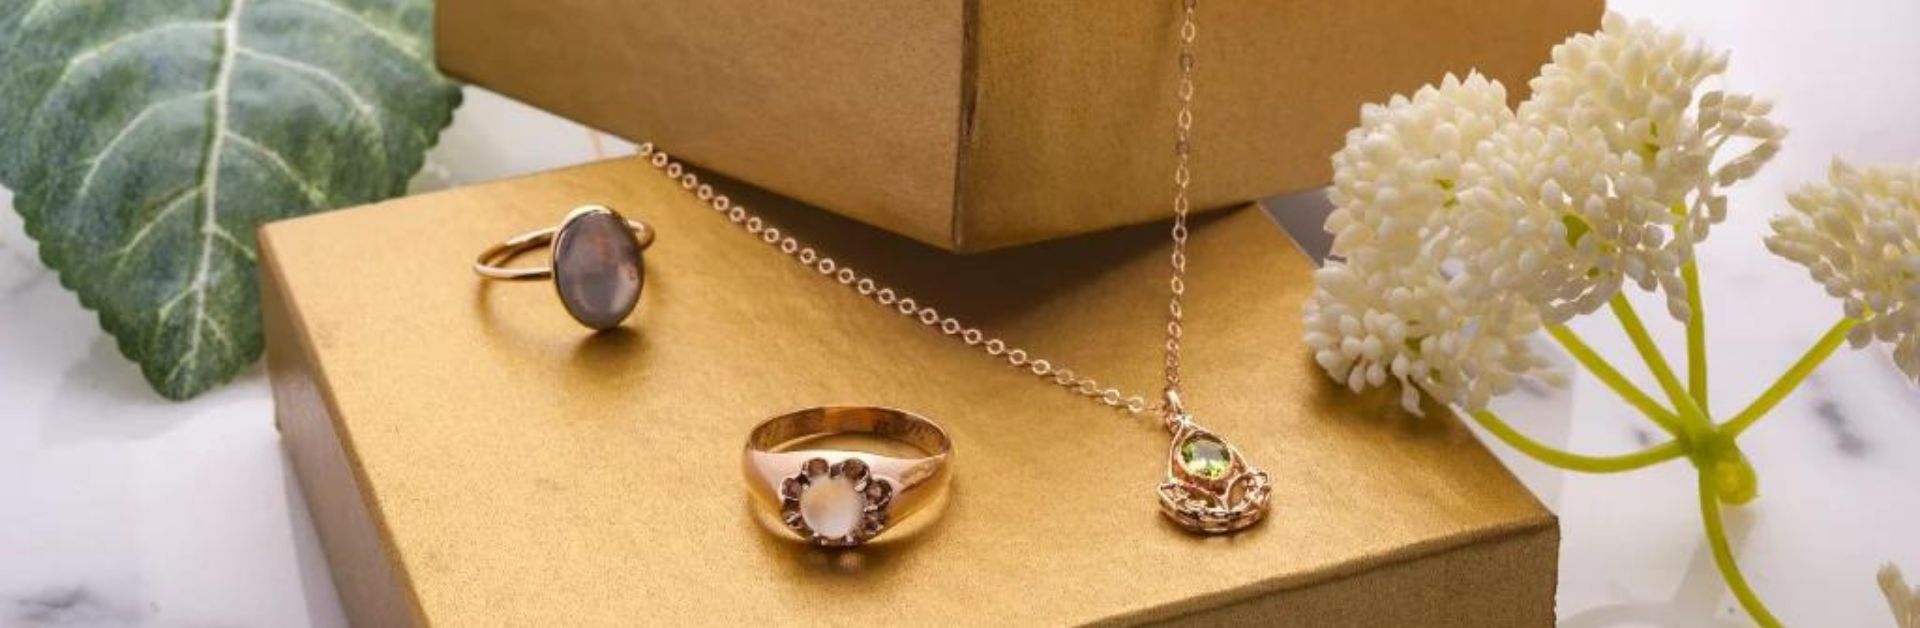 What to do with unwanted and unworn jewelry?